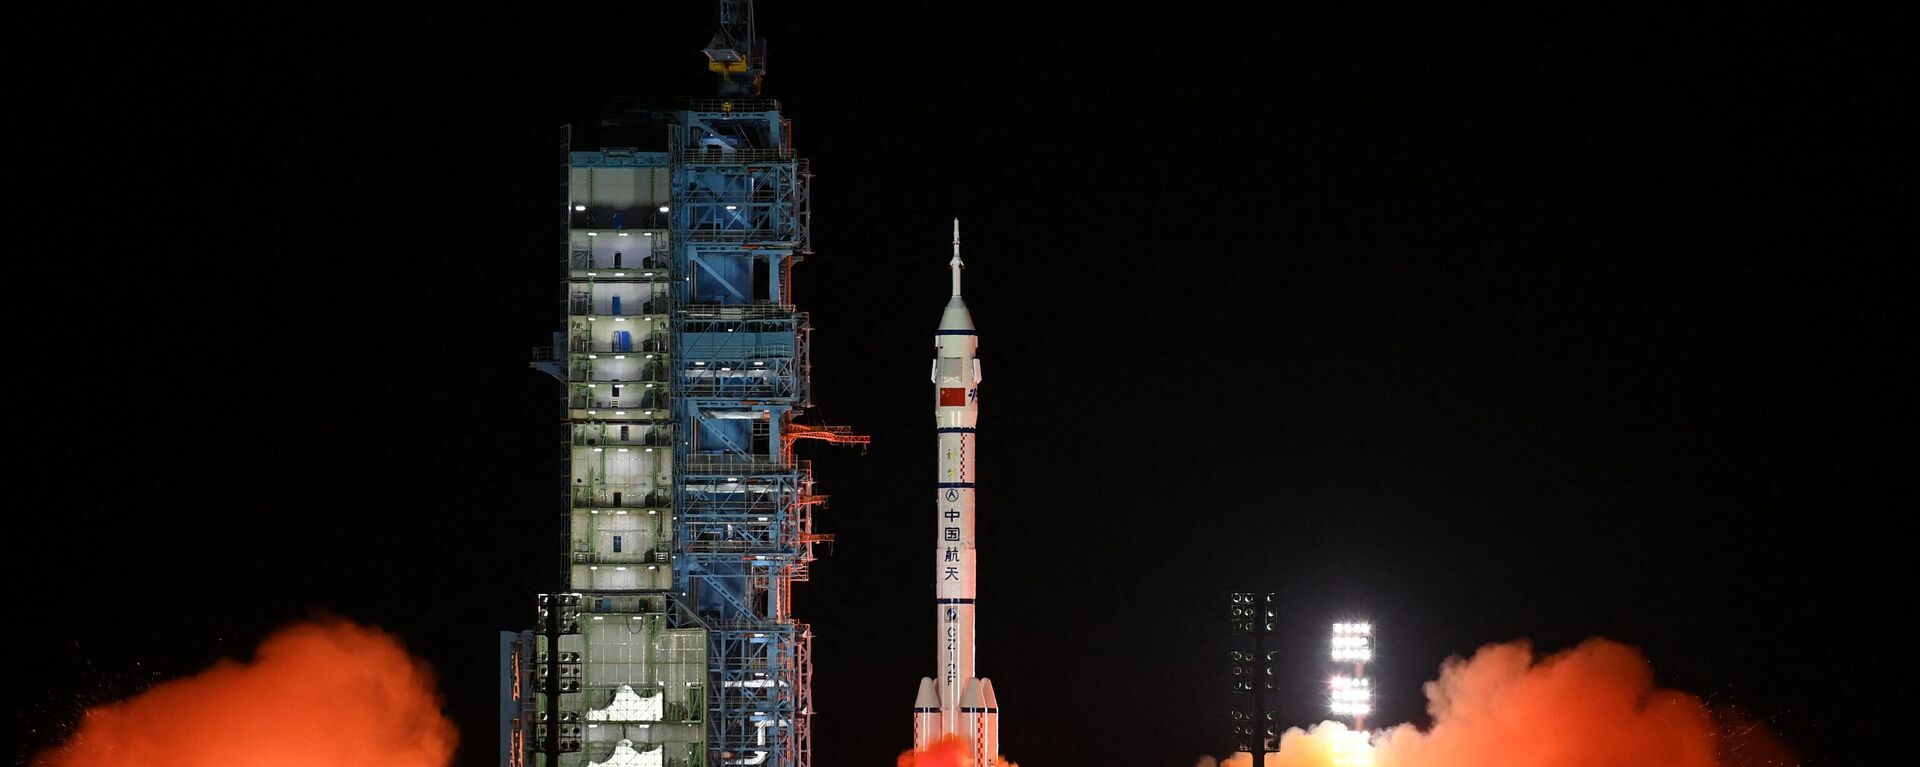 A Long March-2F carrier rocket, carrying the Shenzhou-15 spacecraft with three astronauts to China's Tiangong space station, lifts off from the Jiuquan Satellite Launch Center in Northwest China’s Gansu Province late on November 29, 2022. - Sputnik International, 1920, 30.11.2022